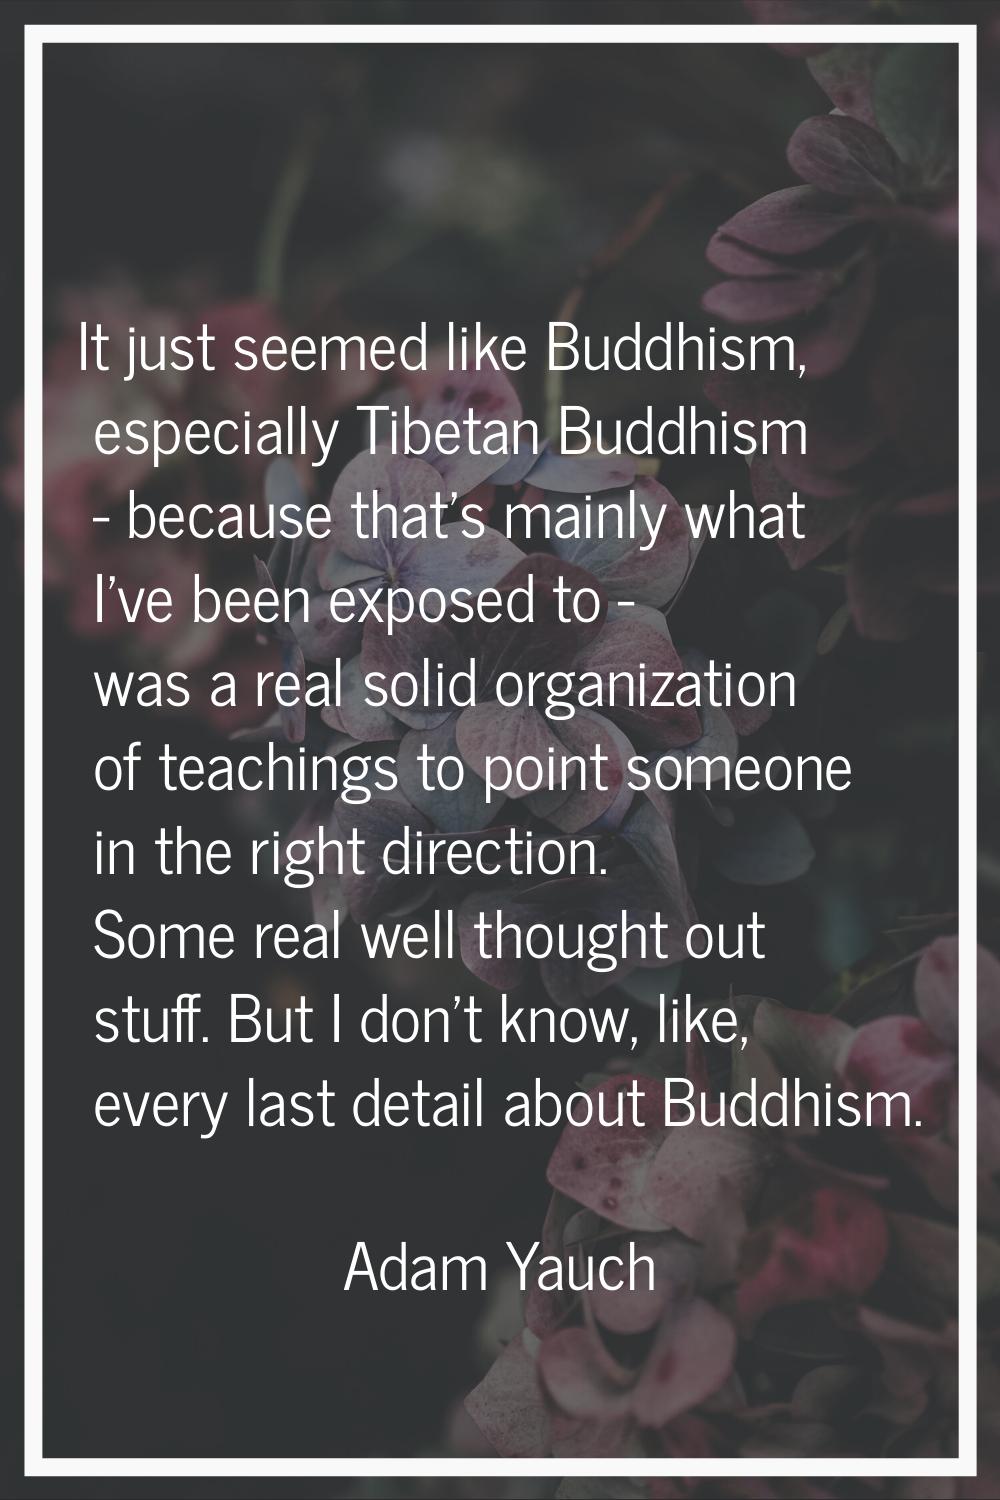 It just seemed like Buddhism, especially Tibetan Buddhism - because that's mainly what I've been ex